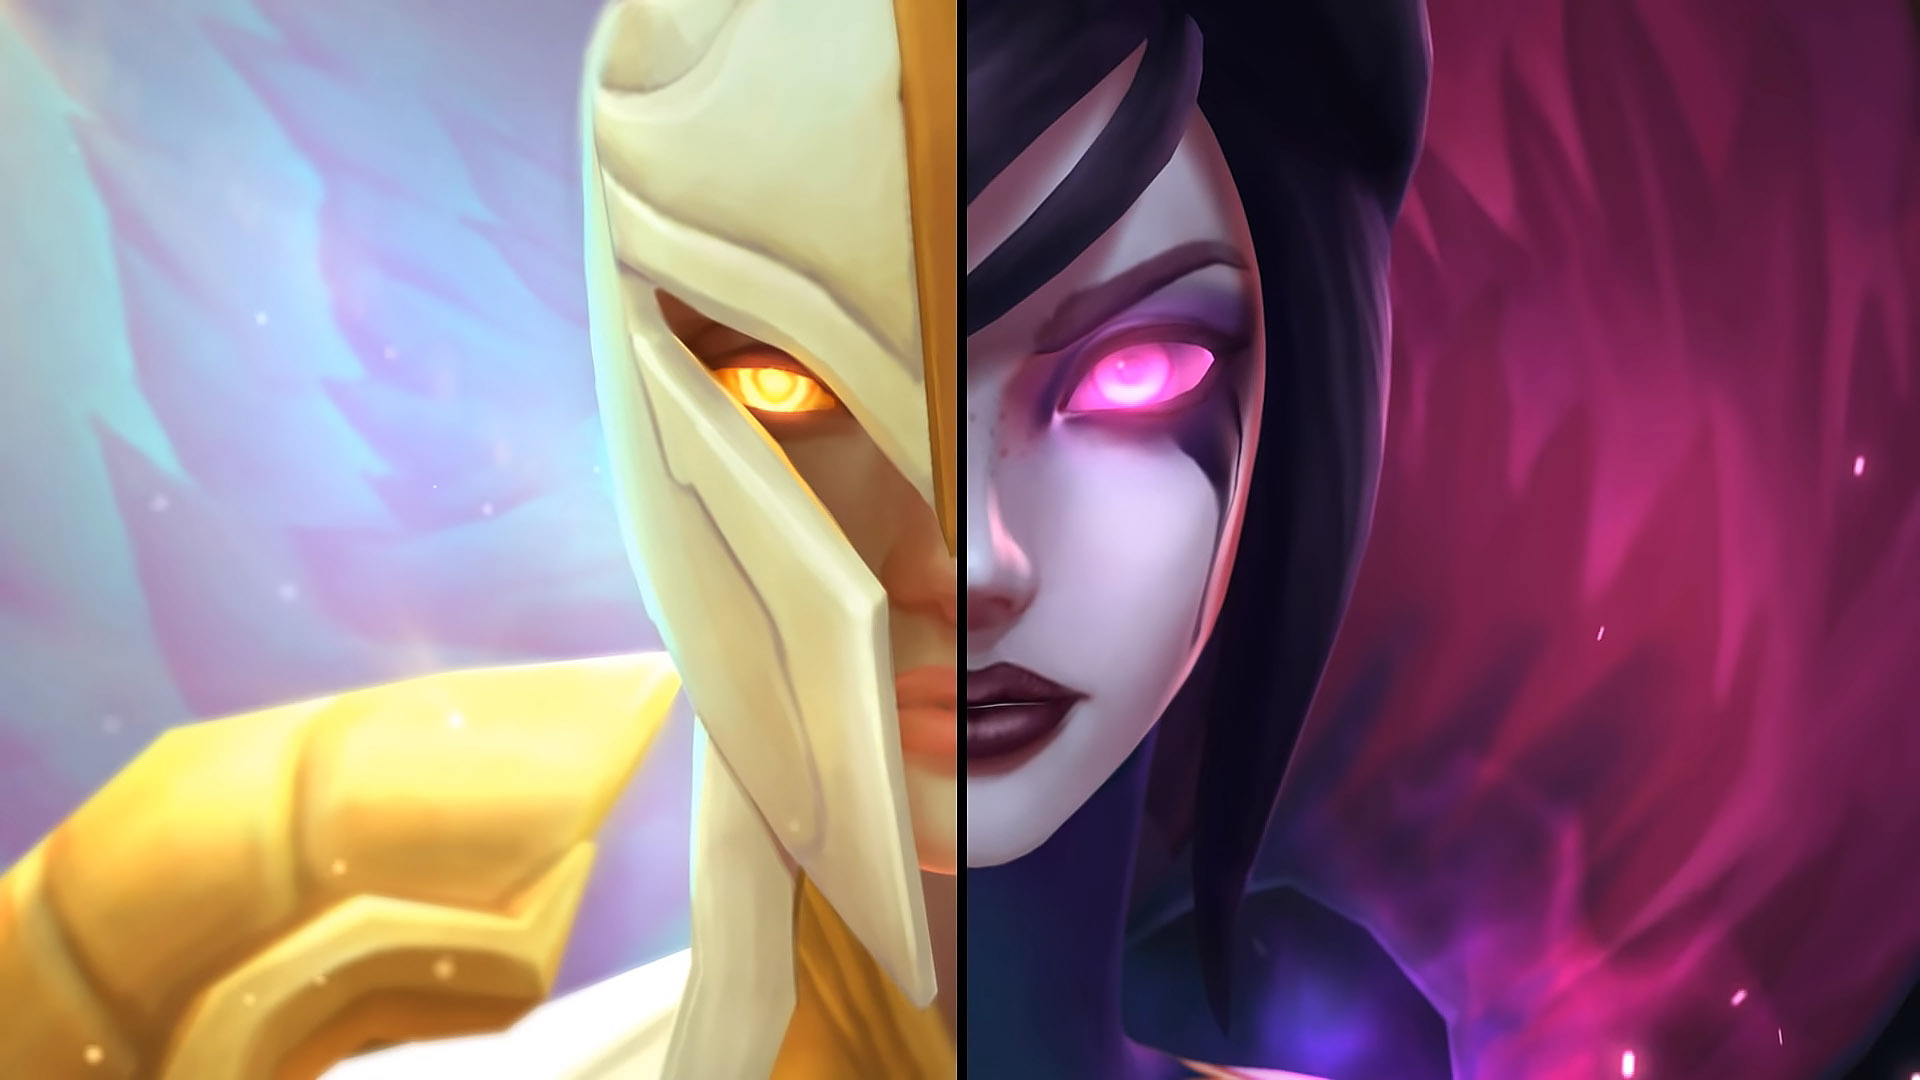 Kayle & Morgana rework (the Righteous - the Fallen) wallpapers: League of Legends (Artist: Riot games)